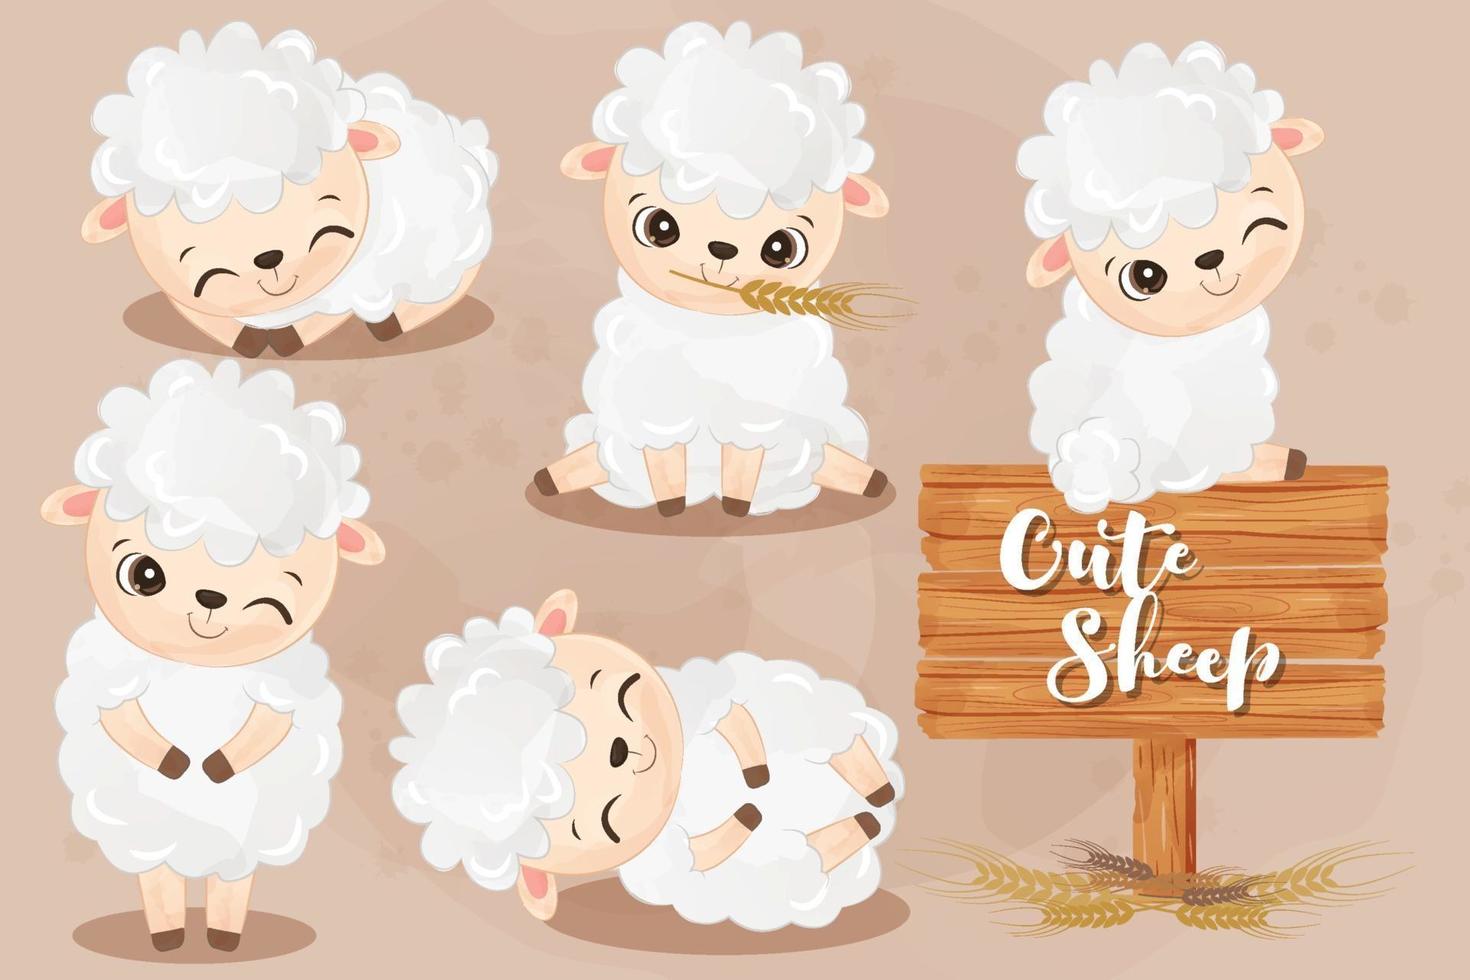 Cute little sheeps collection in watercolor vector